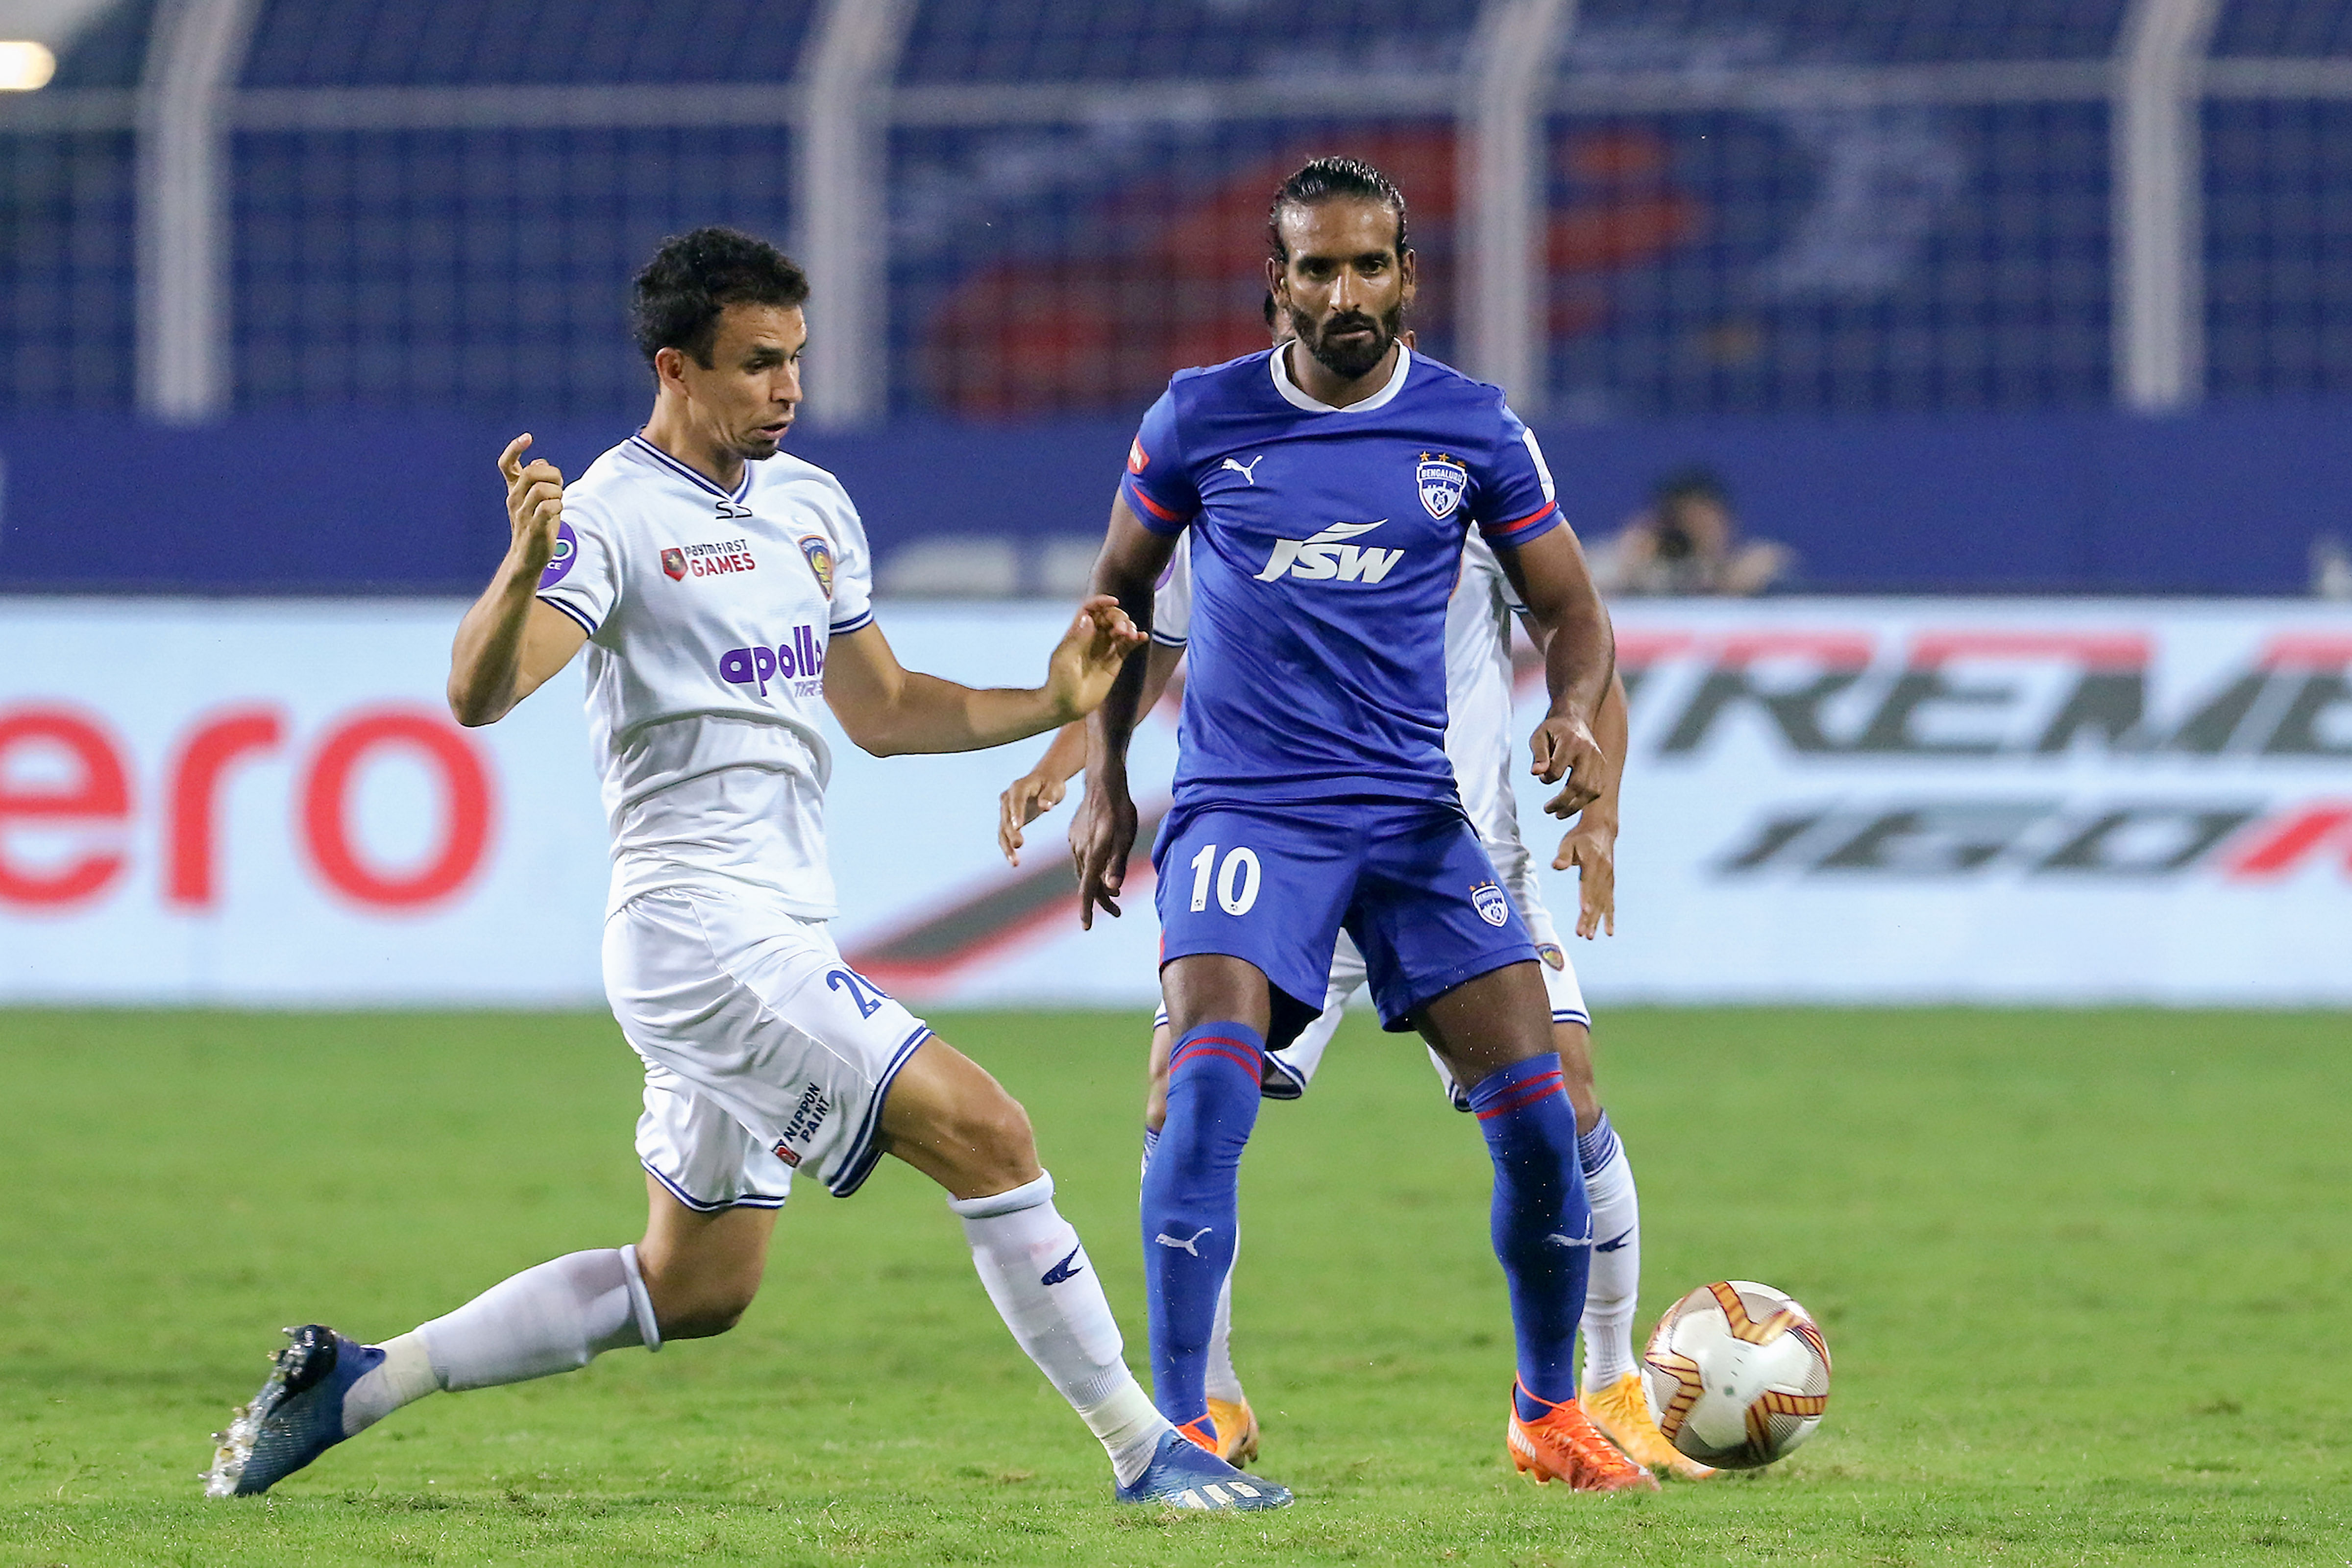 Emerson Gomes De Moura of Chennaiyin FC and Harmanjot Singh Khabra of Bengaluru FC in action during the Indian Super League match between Bengaluru FC and Chennaiyin FC. Credit: PTI Photo